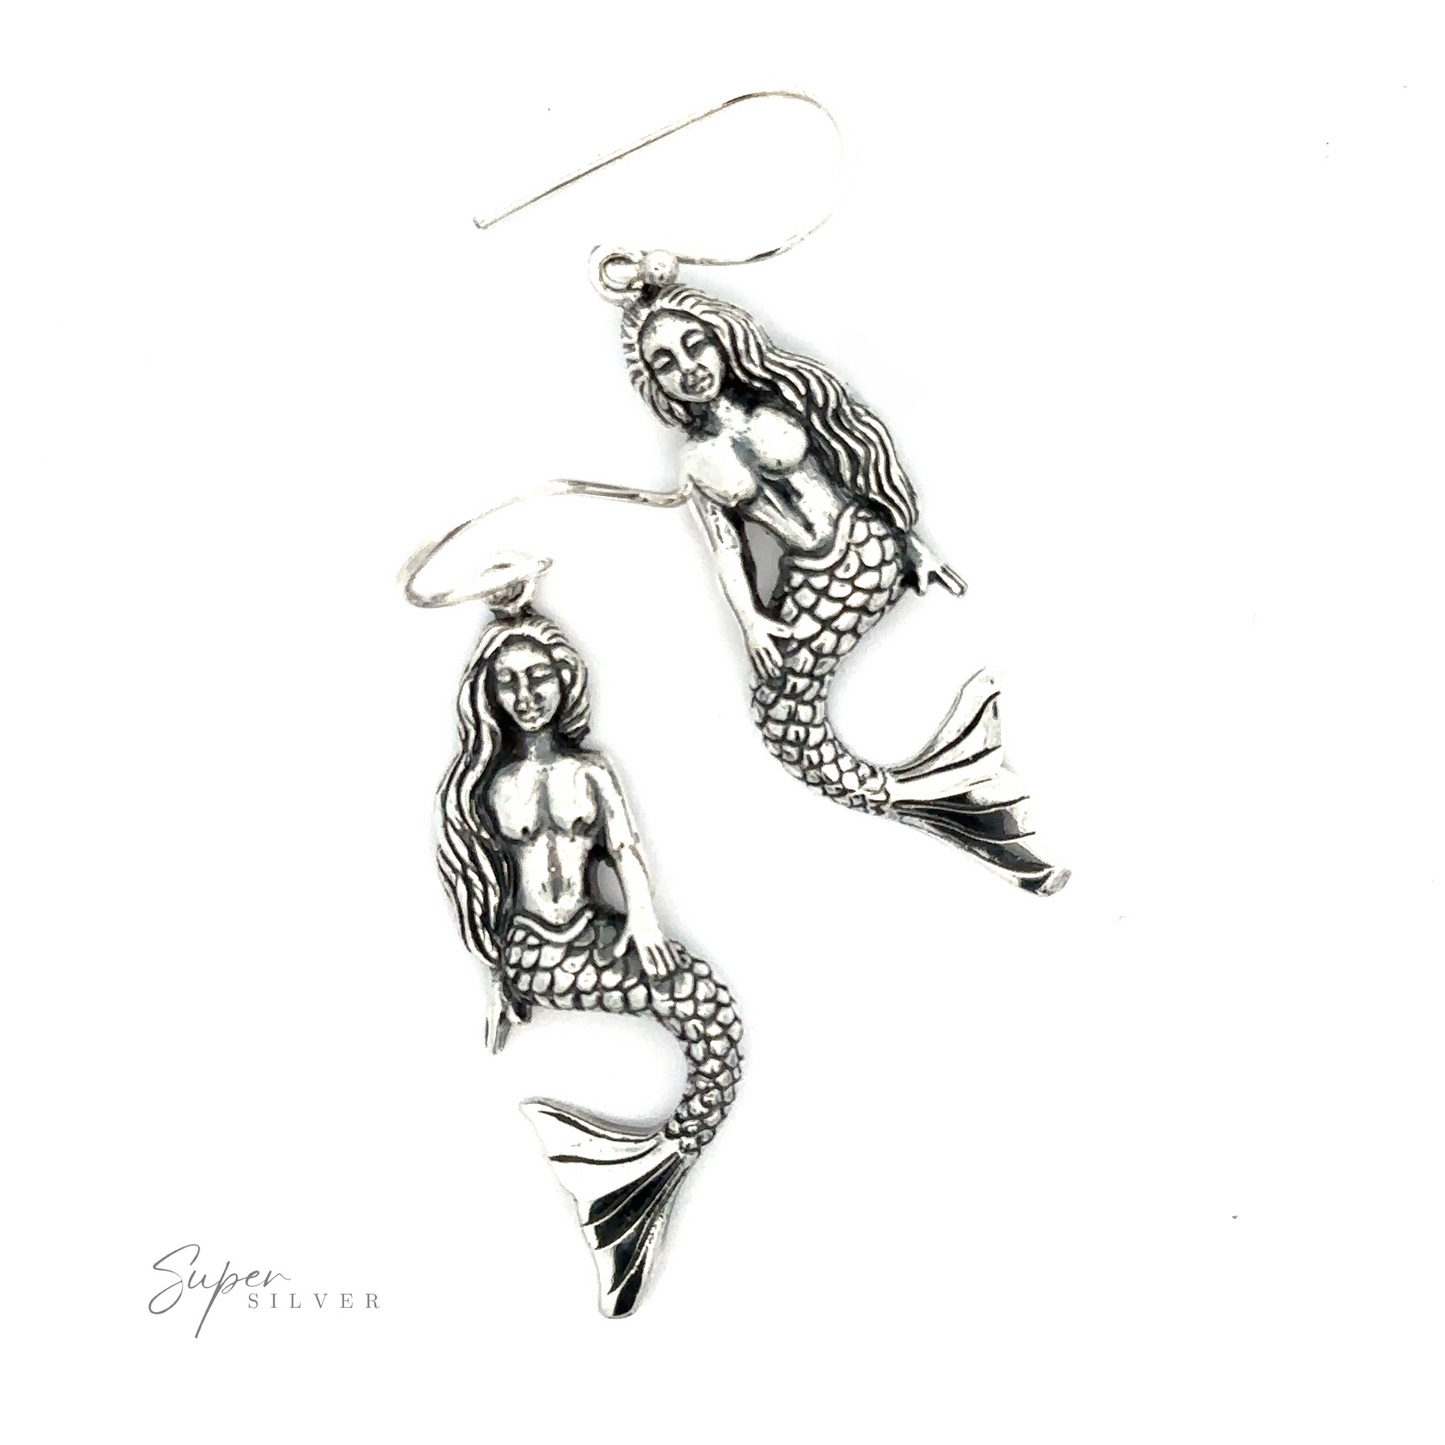 A pair of sterling silver Sitting Mermaid earrings with detailed design, displayed on a white background.